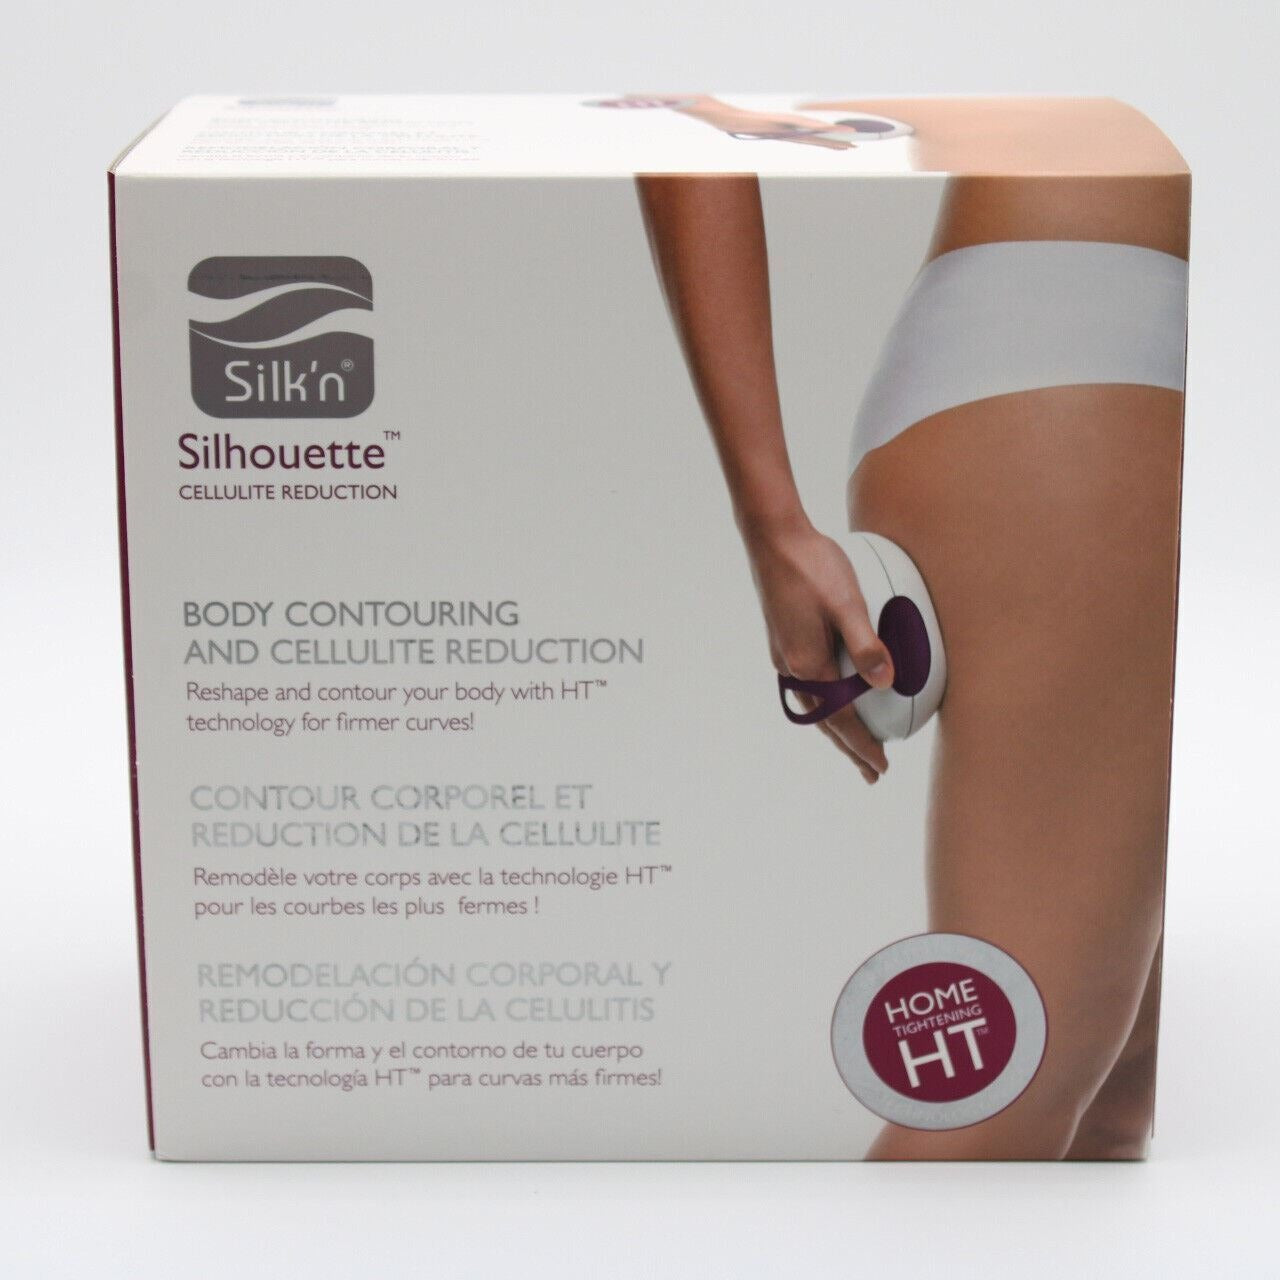 Silk’n Silhouette  Body Contouring and Cellulite Reduction